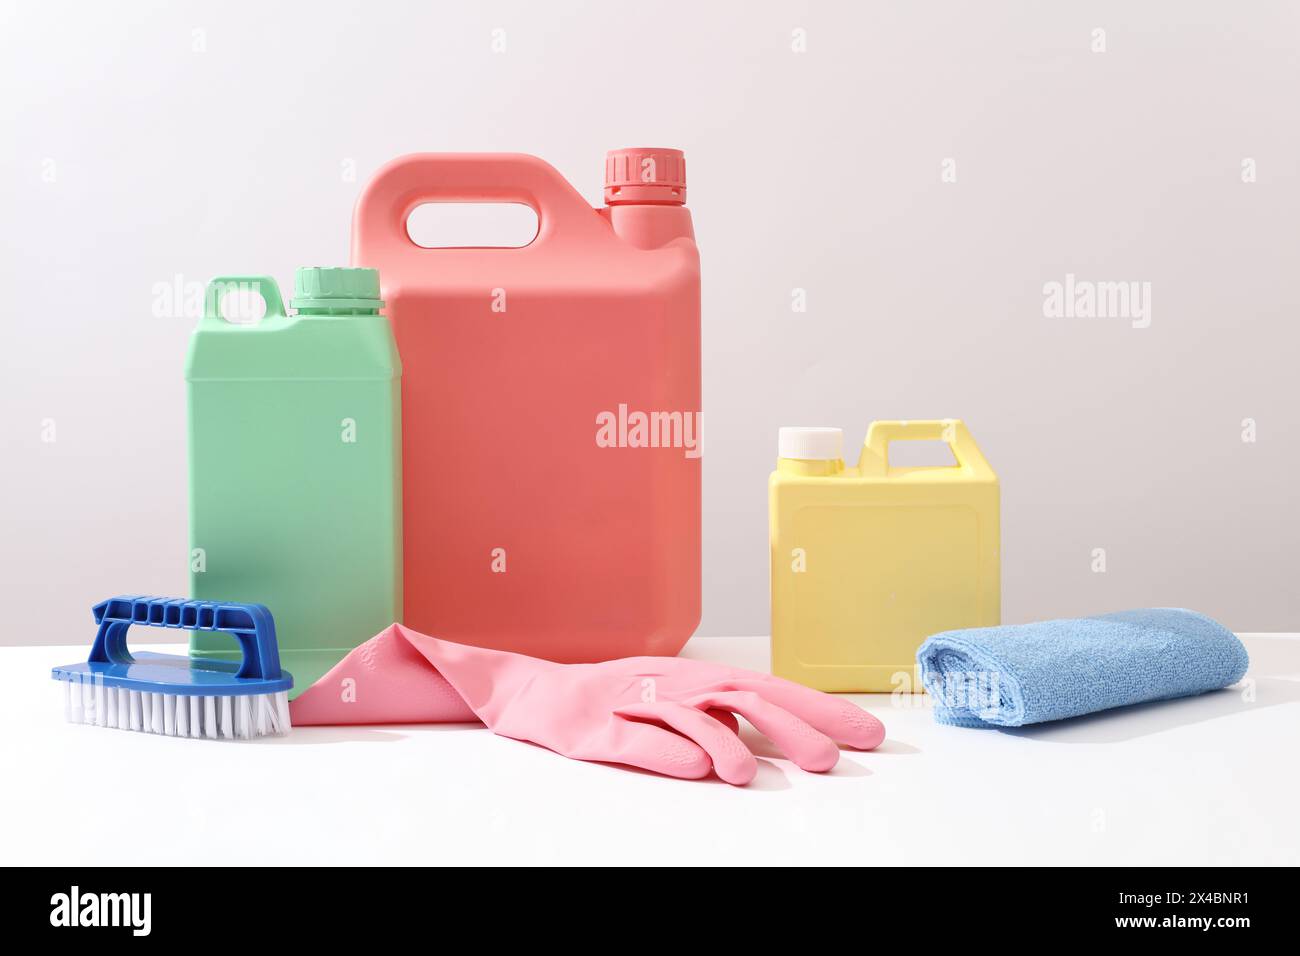 Advertising scene for housework and professional cleaning service supplies. Plastic canisters mockup for detergent product decorated with rubber glove Stock Photo